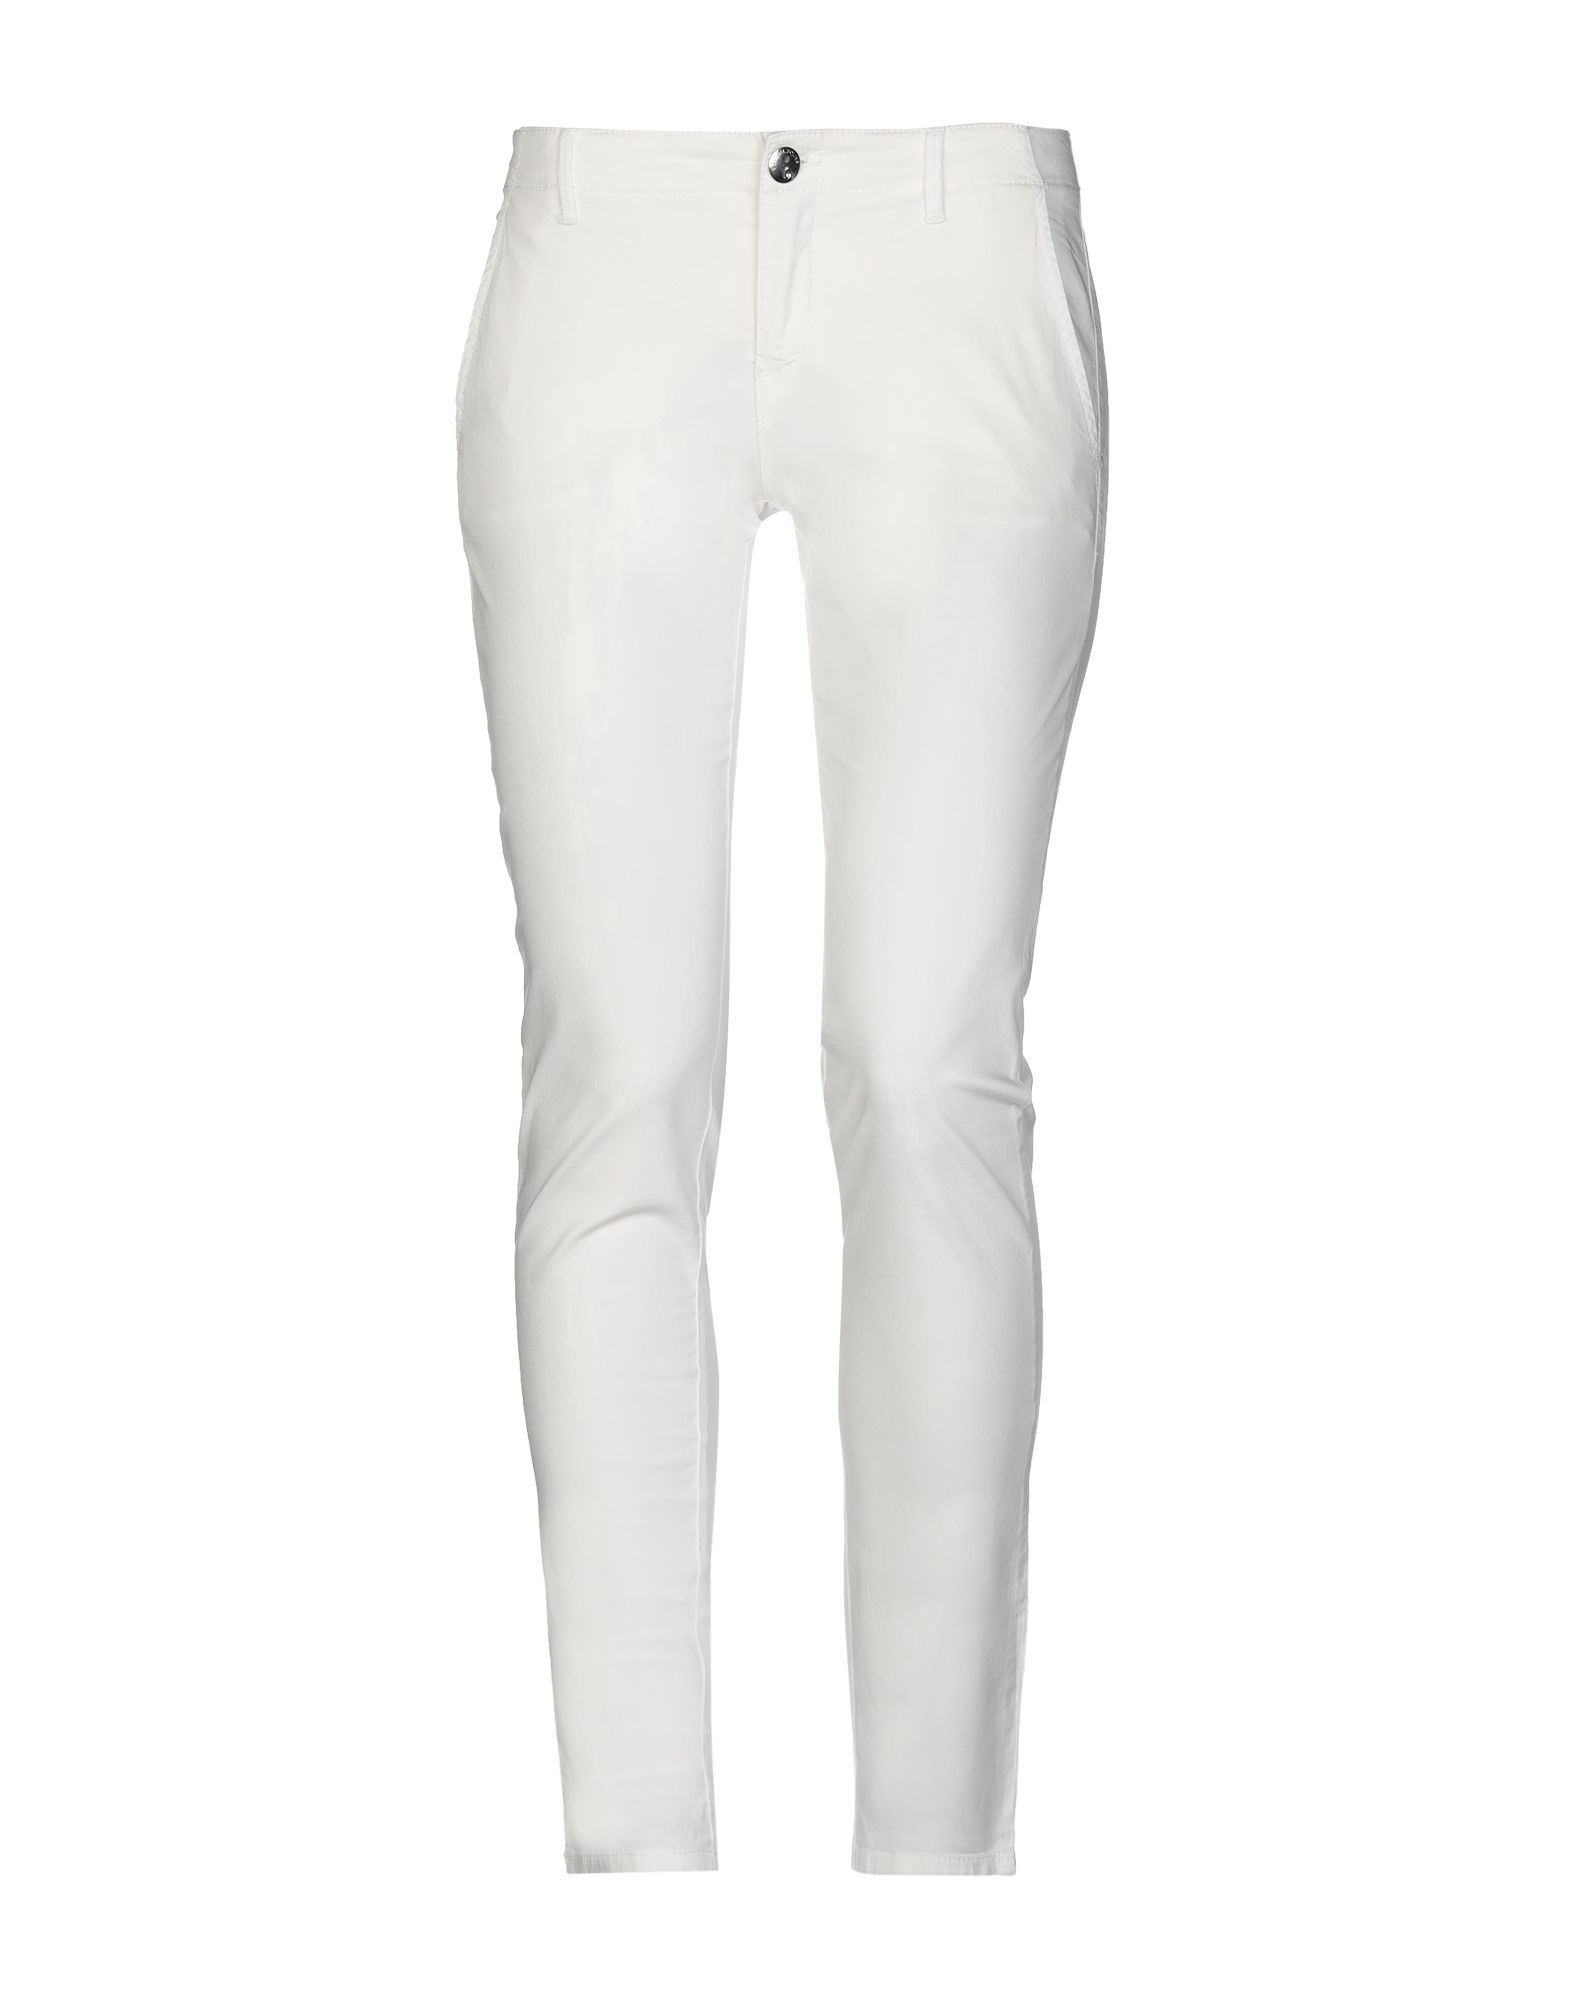 plain weave, rhinestones, logo, solid colour, mid rise, slim fit, tapered leg, button, zip, multipockets, stretch, chinos